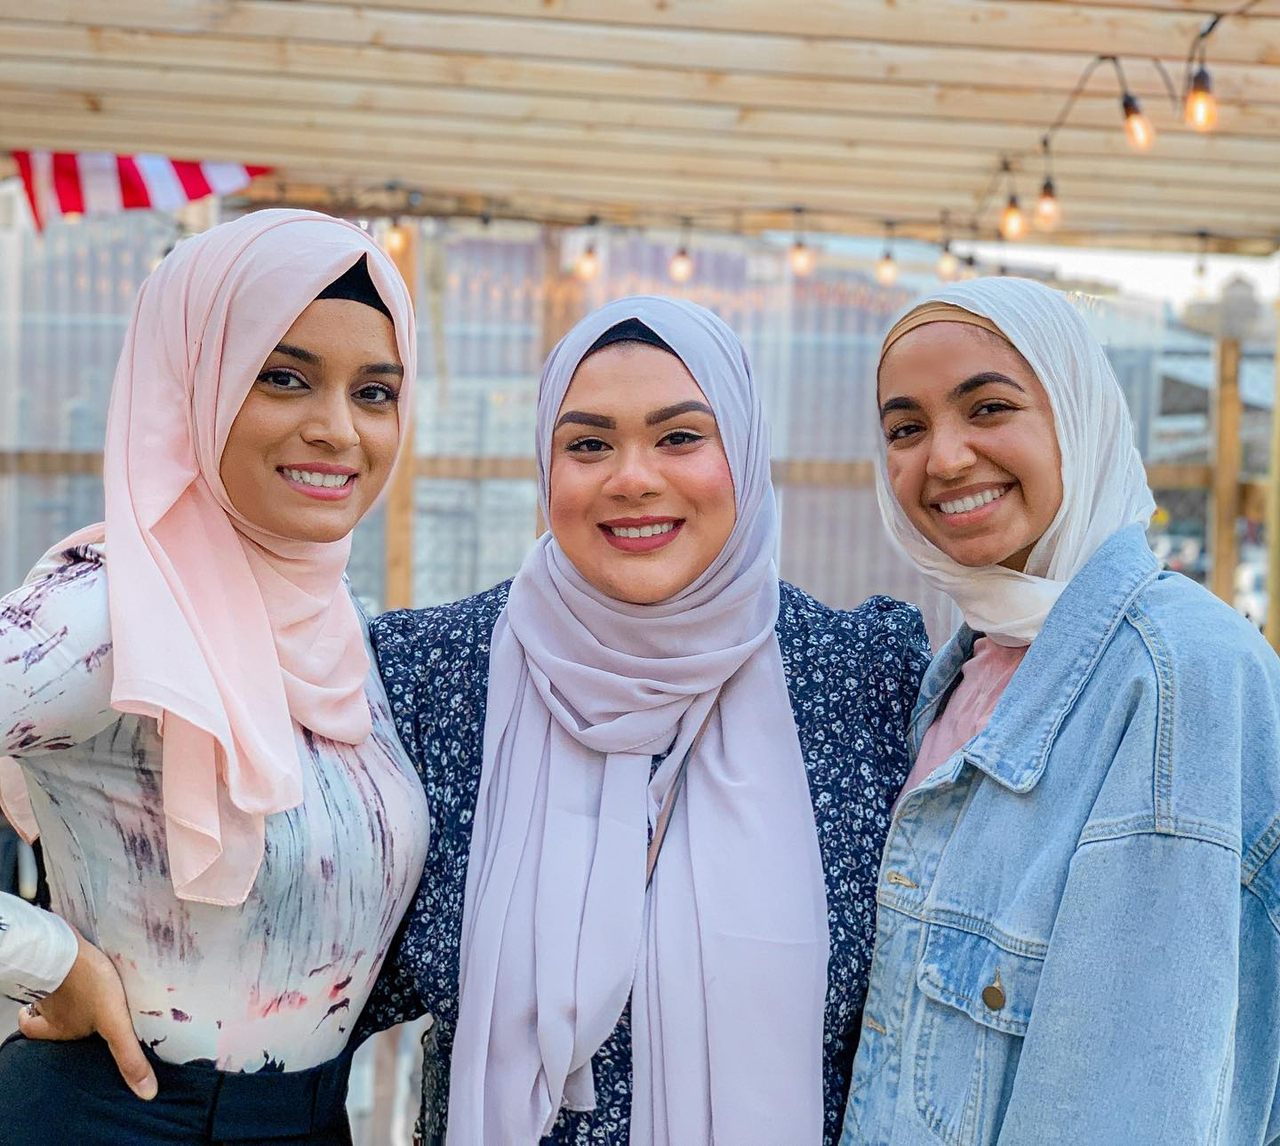 Left to right: Tahirah Baksh, Jiniya Azad, and Sameen Choudhry hope to drive business to halal restaurants with their blog and social media accounts.